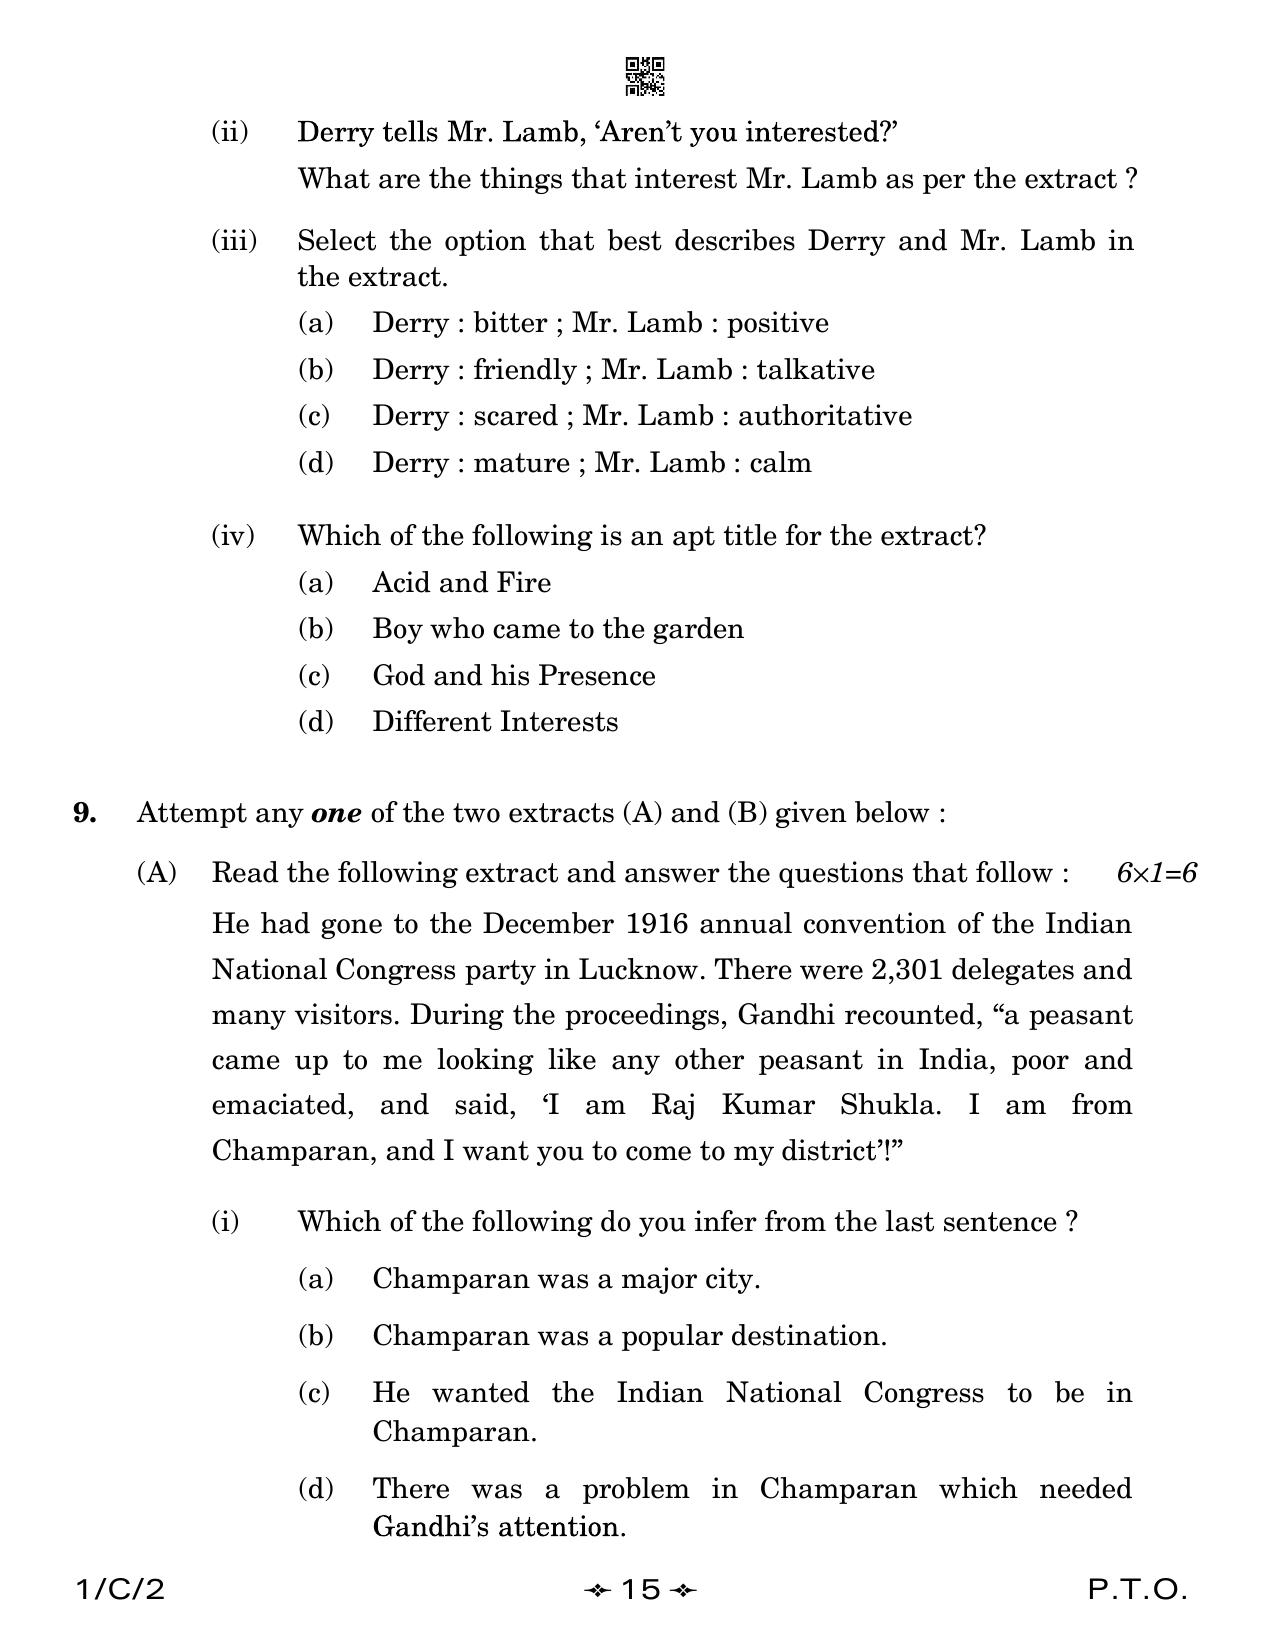 CBSE Class 12 1-2 English Core 2023 (Compartment) Question Paper - Page 15